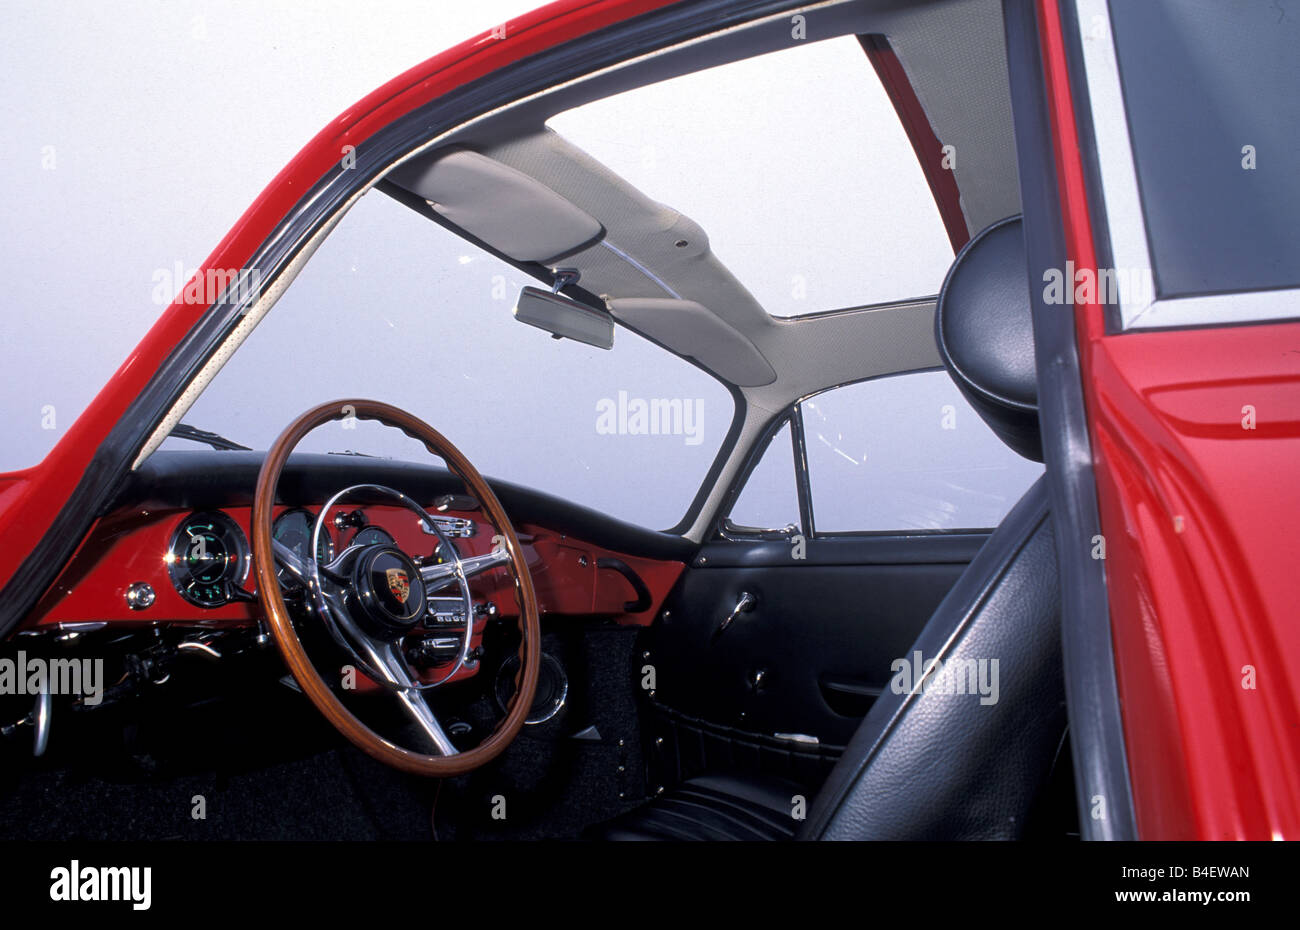 Car, Porsche 356 Carrera 2, model year 1963, red, sports car, Coupé, Coupe, red, vintage car, 1960s, sixties, interior, Cockpit, Stock Photo